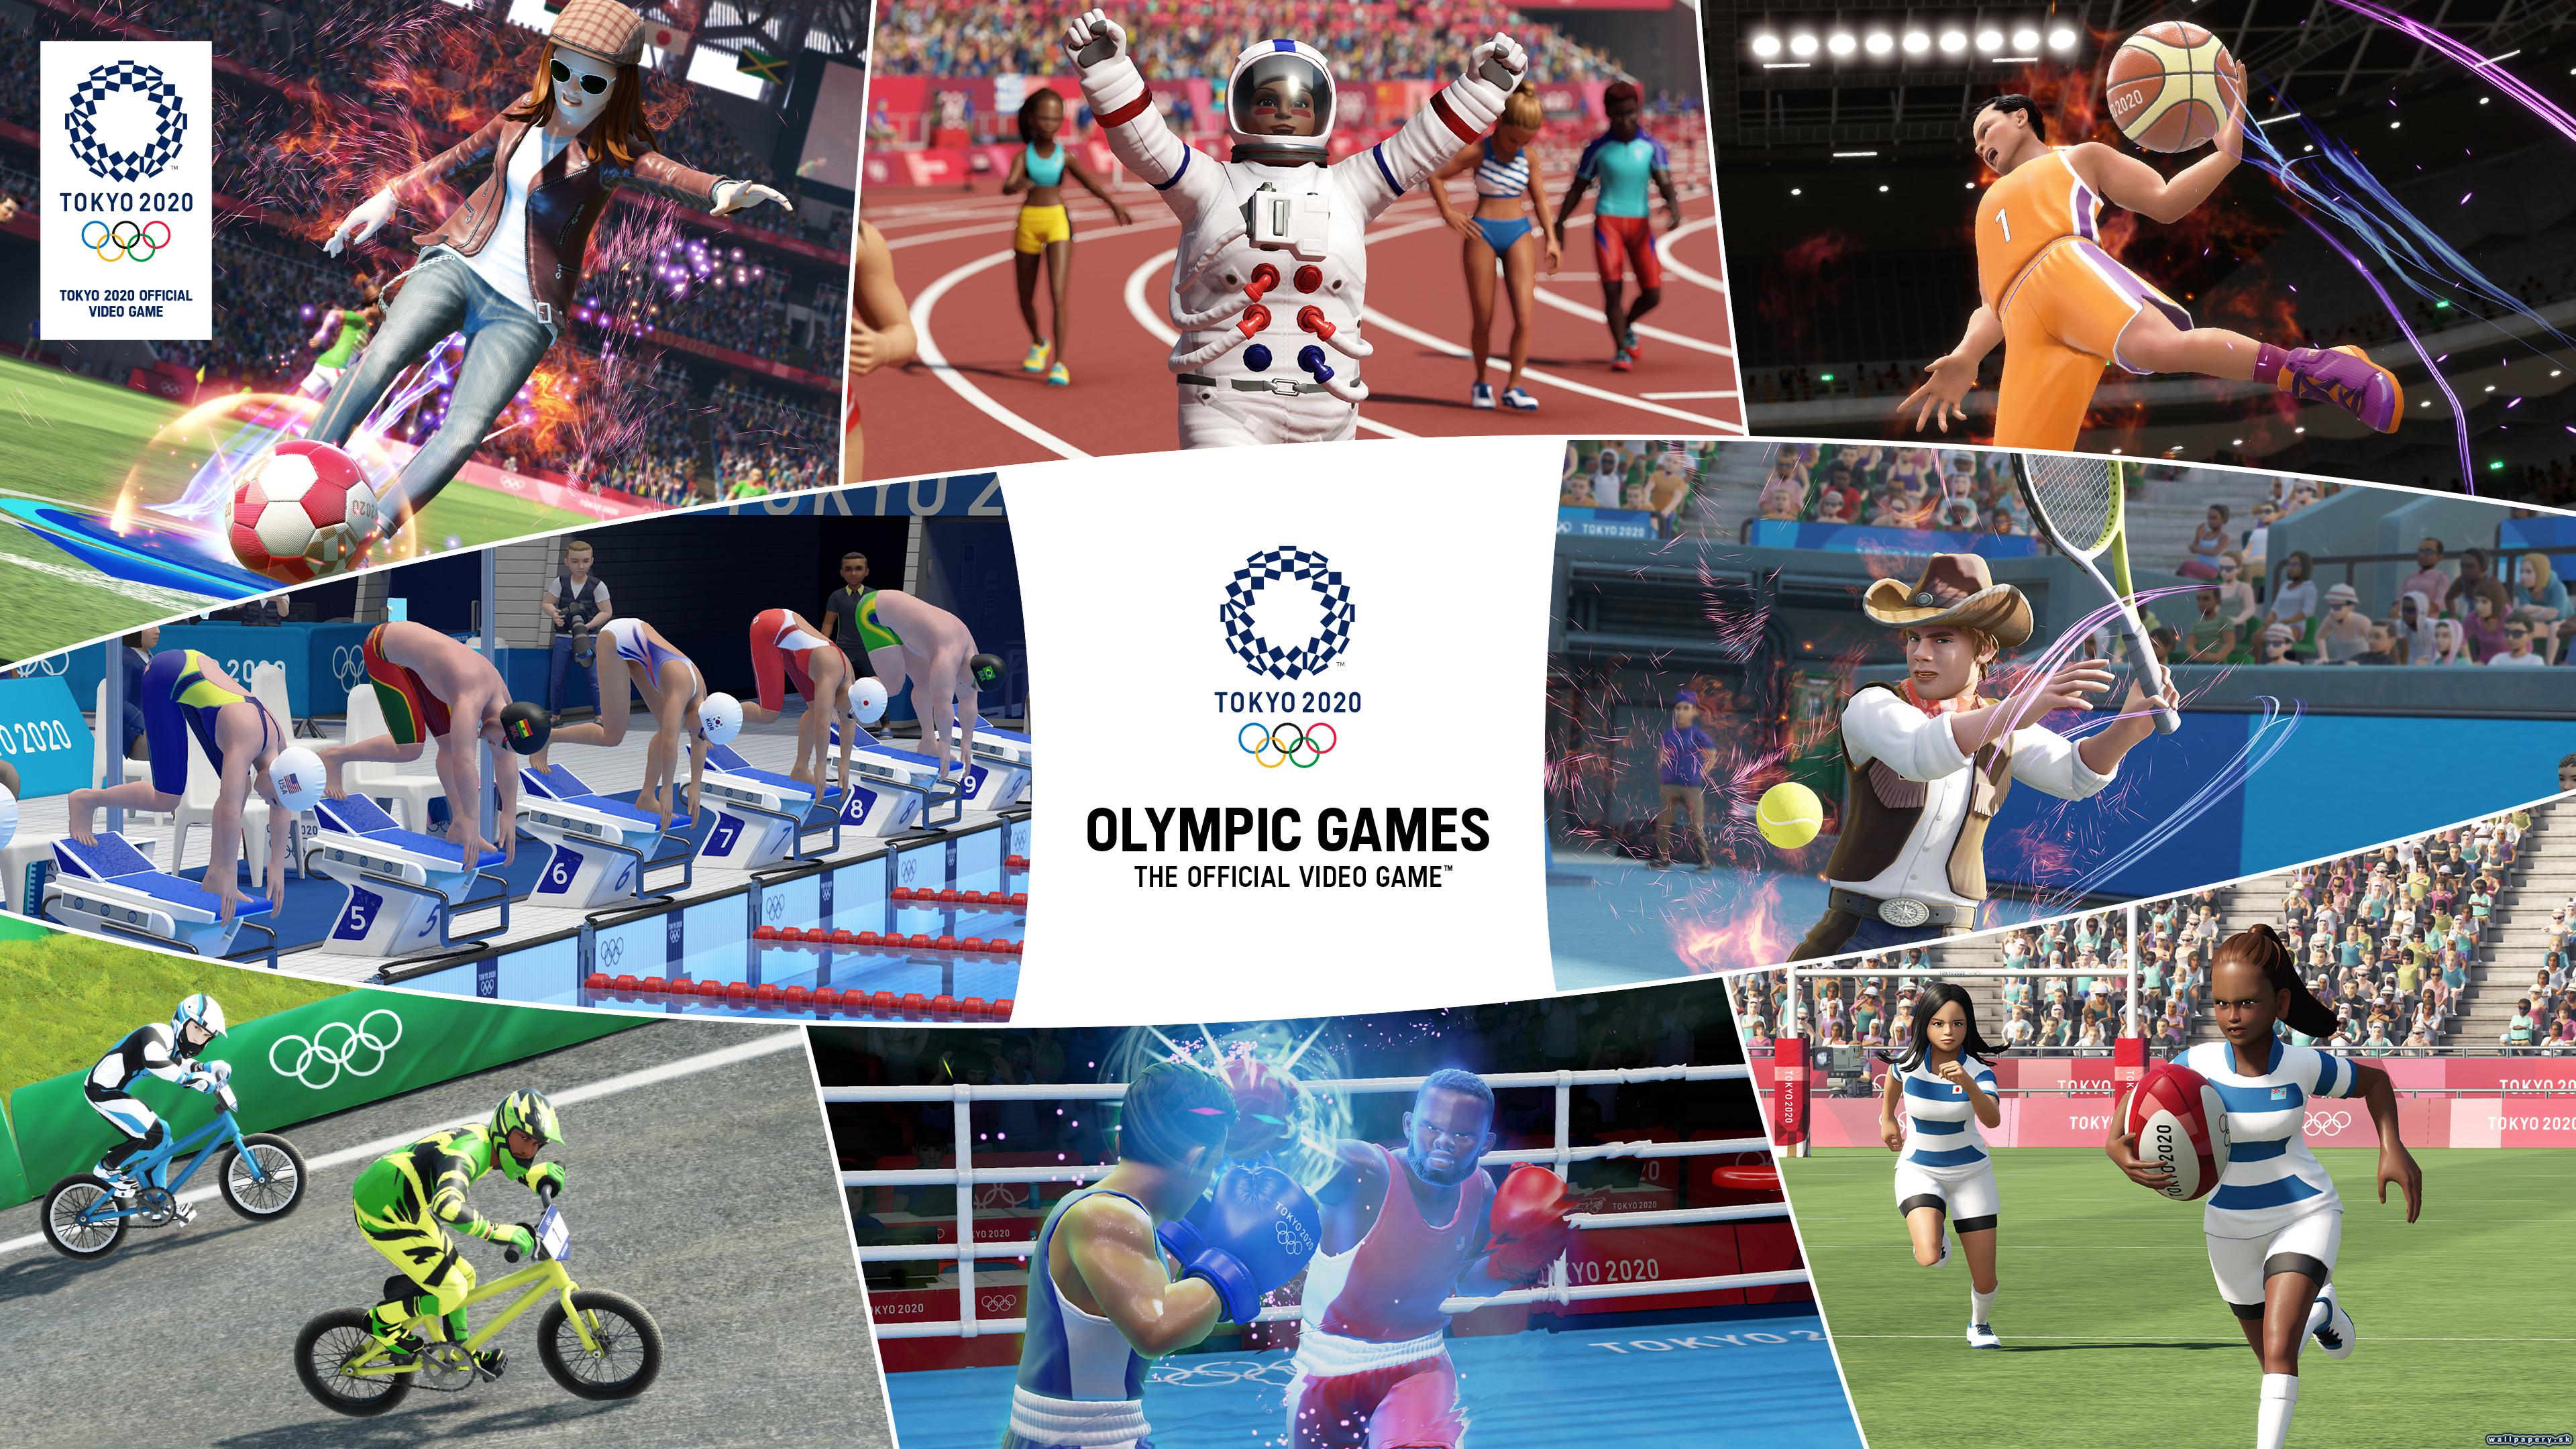 Olympic Games Tokyo 2020 - The Official Video Game - wallpaper 1